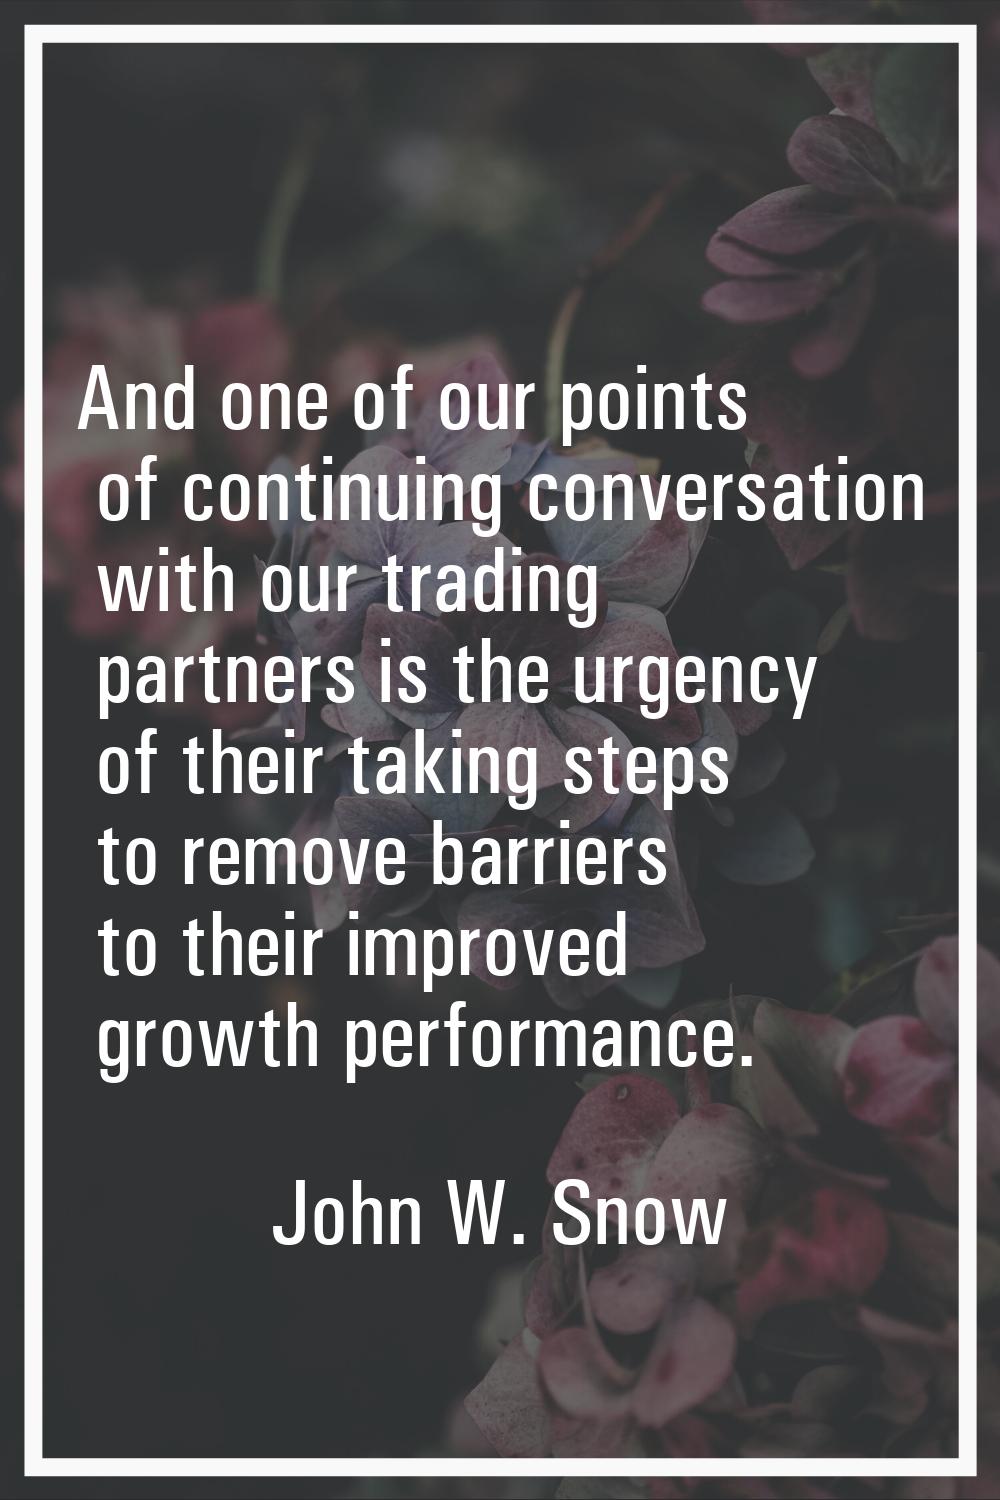 And one of our points of continuing conversation with our trading partners is the urgency of their 